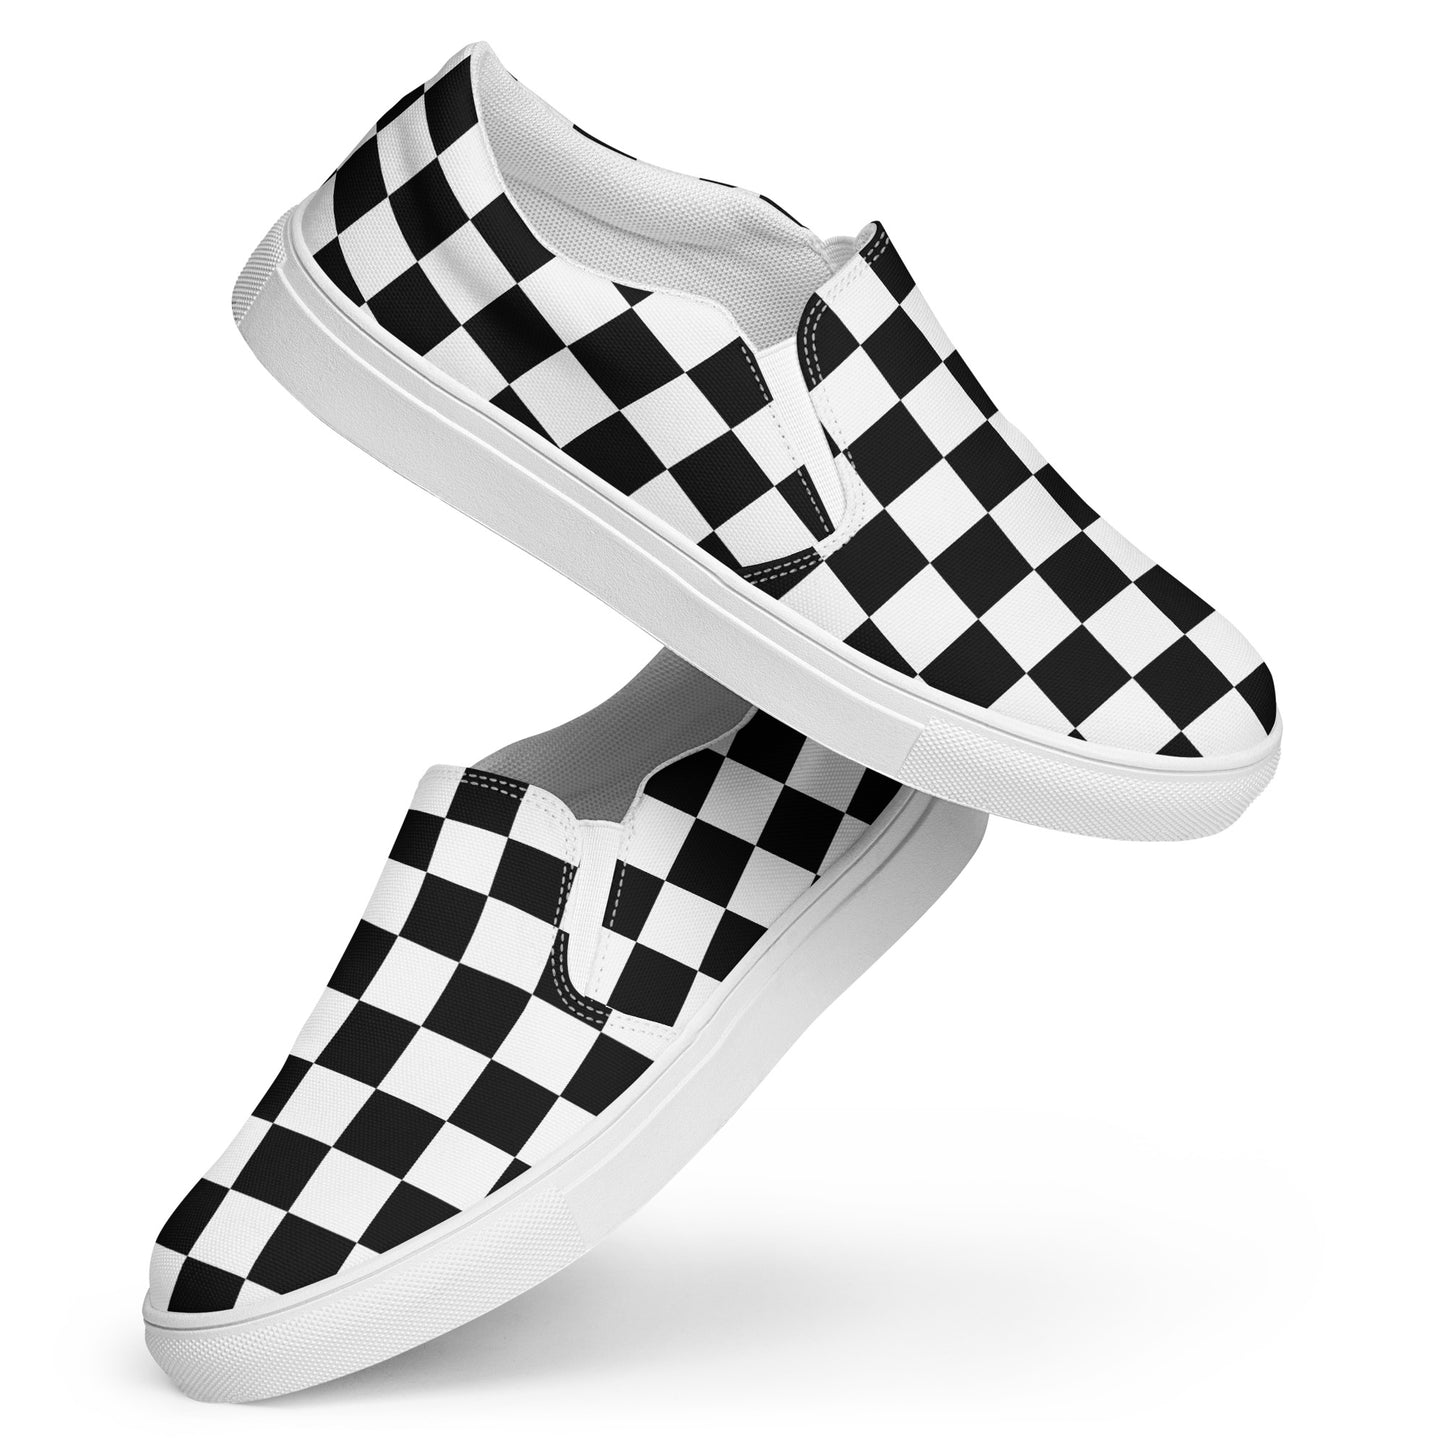 Checkmate - Inspired By Harry Styles - Sustainably Made Women’s slip-on canvas shoes